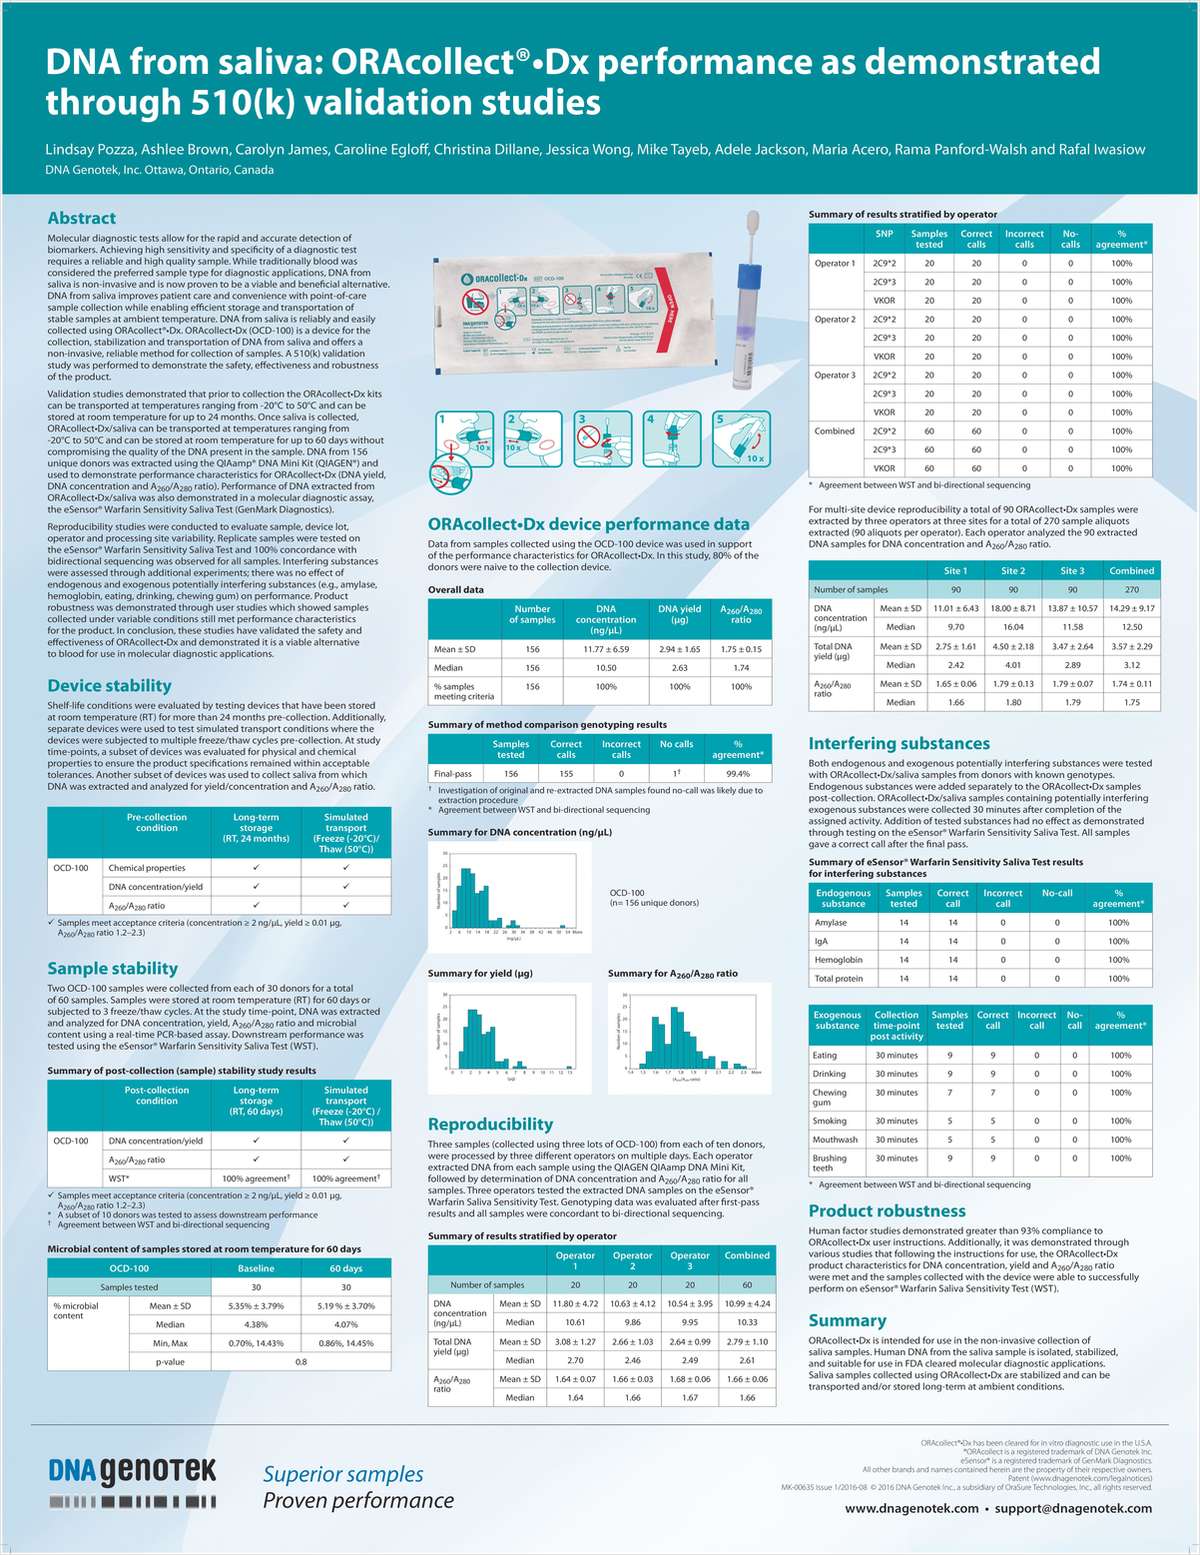 DNA From Saliva: ORAcollect Dx Performance as Demonstrated Through 510(k) Validation Studies